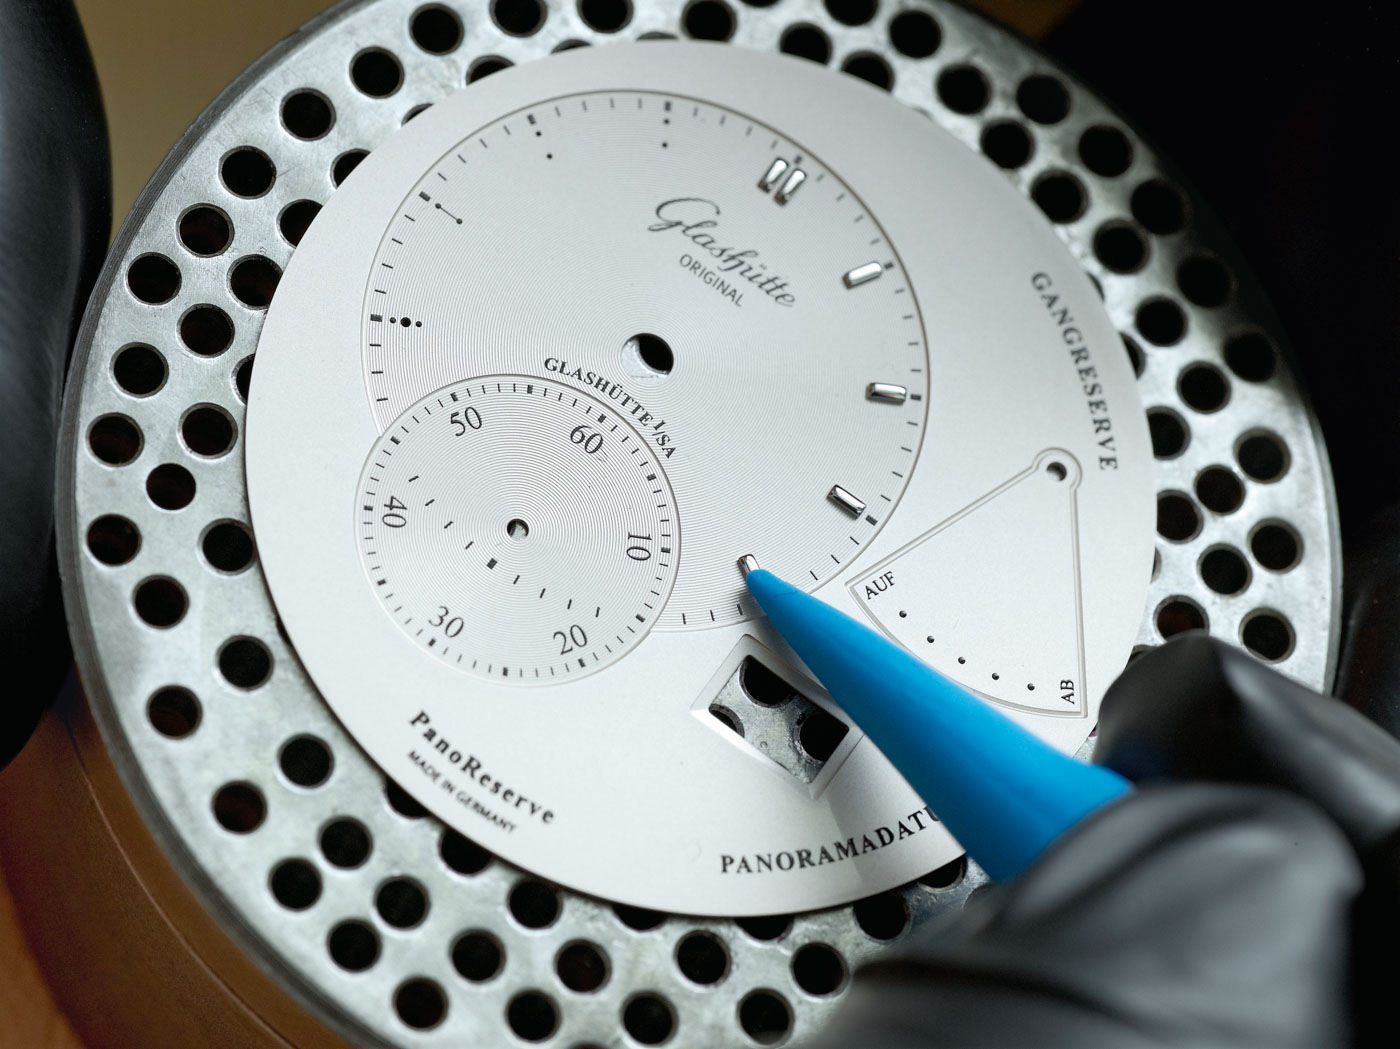 Glashutte Original watch dial manufacture - applying watch dial indices